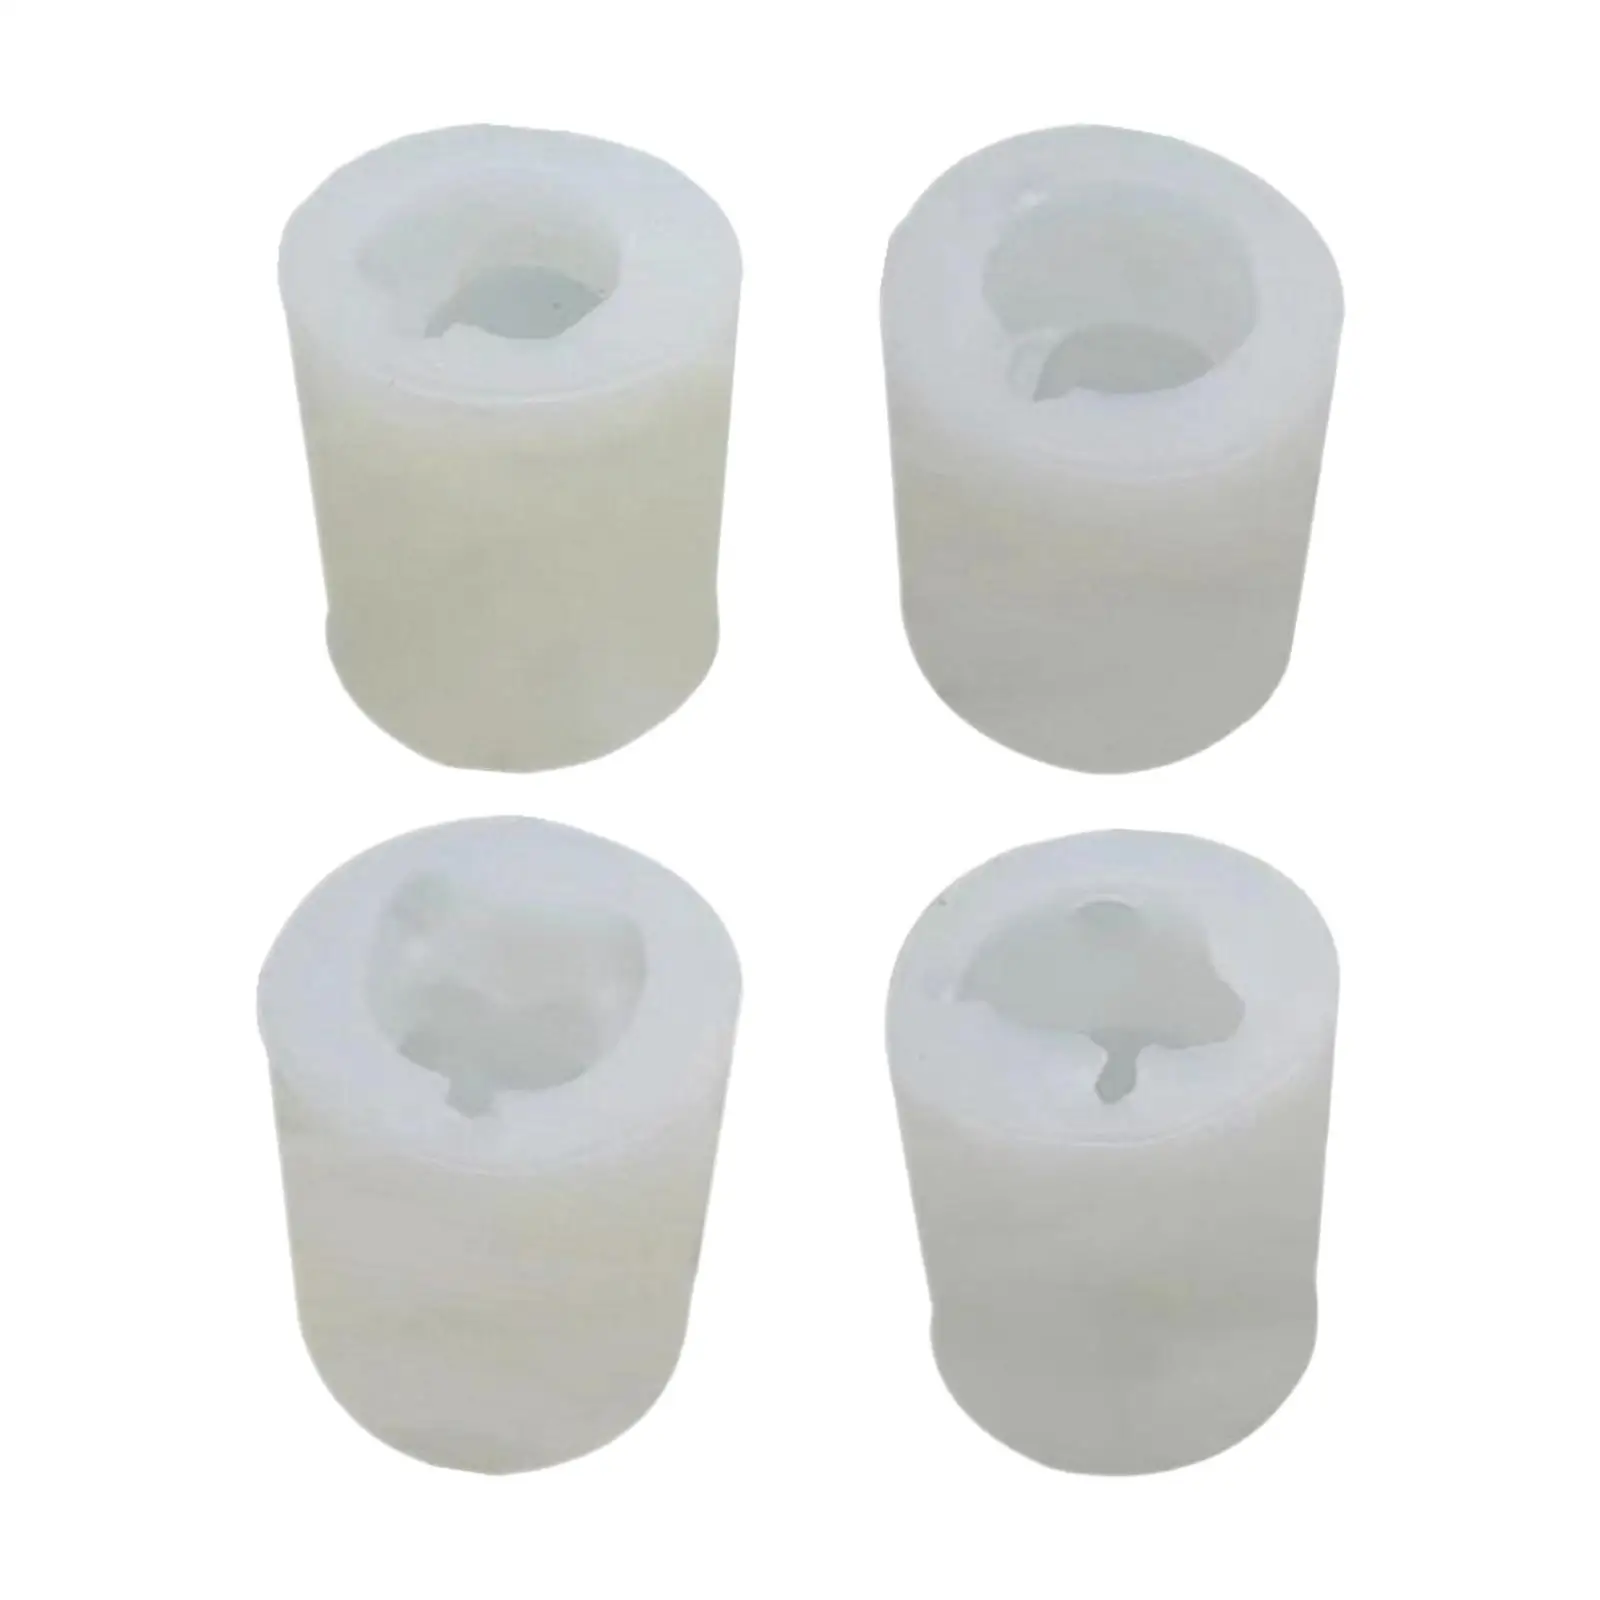 4 Pieces Bunny Chocolate Moulds Silicone Bunny Baking Mould Cake Moulds for Baking Party Pudding Cake Ice Cream